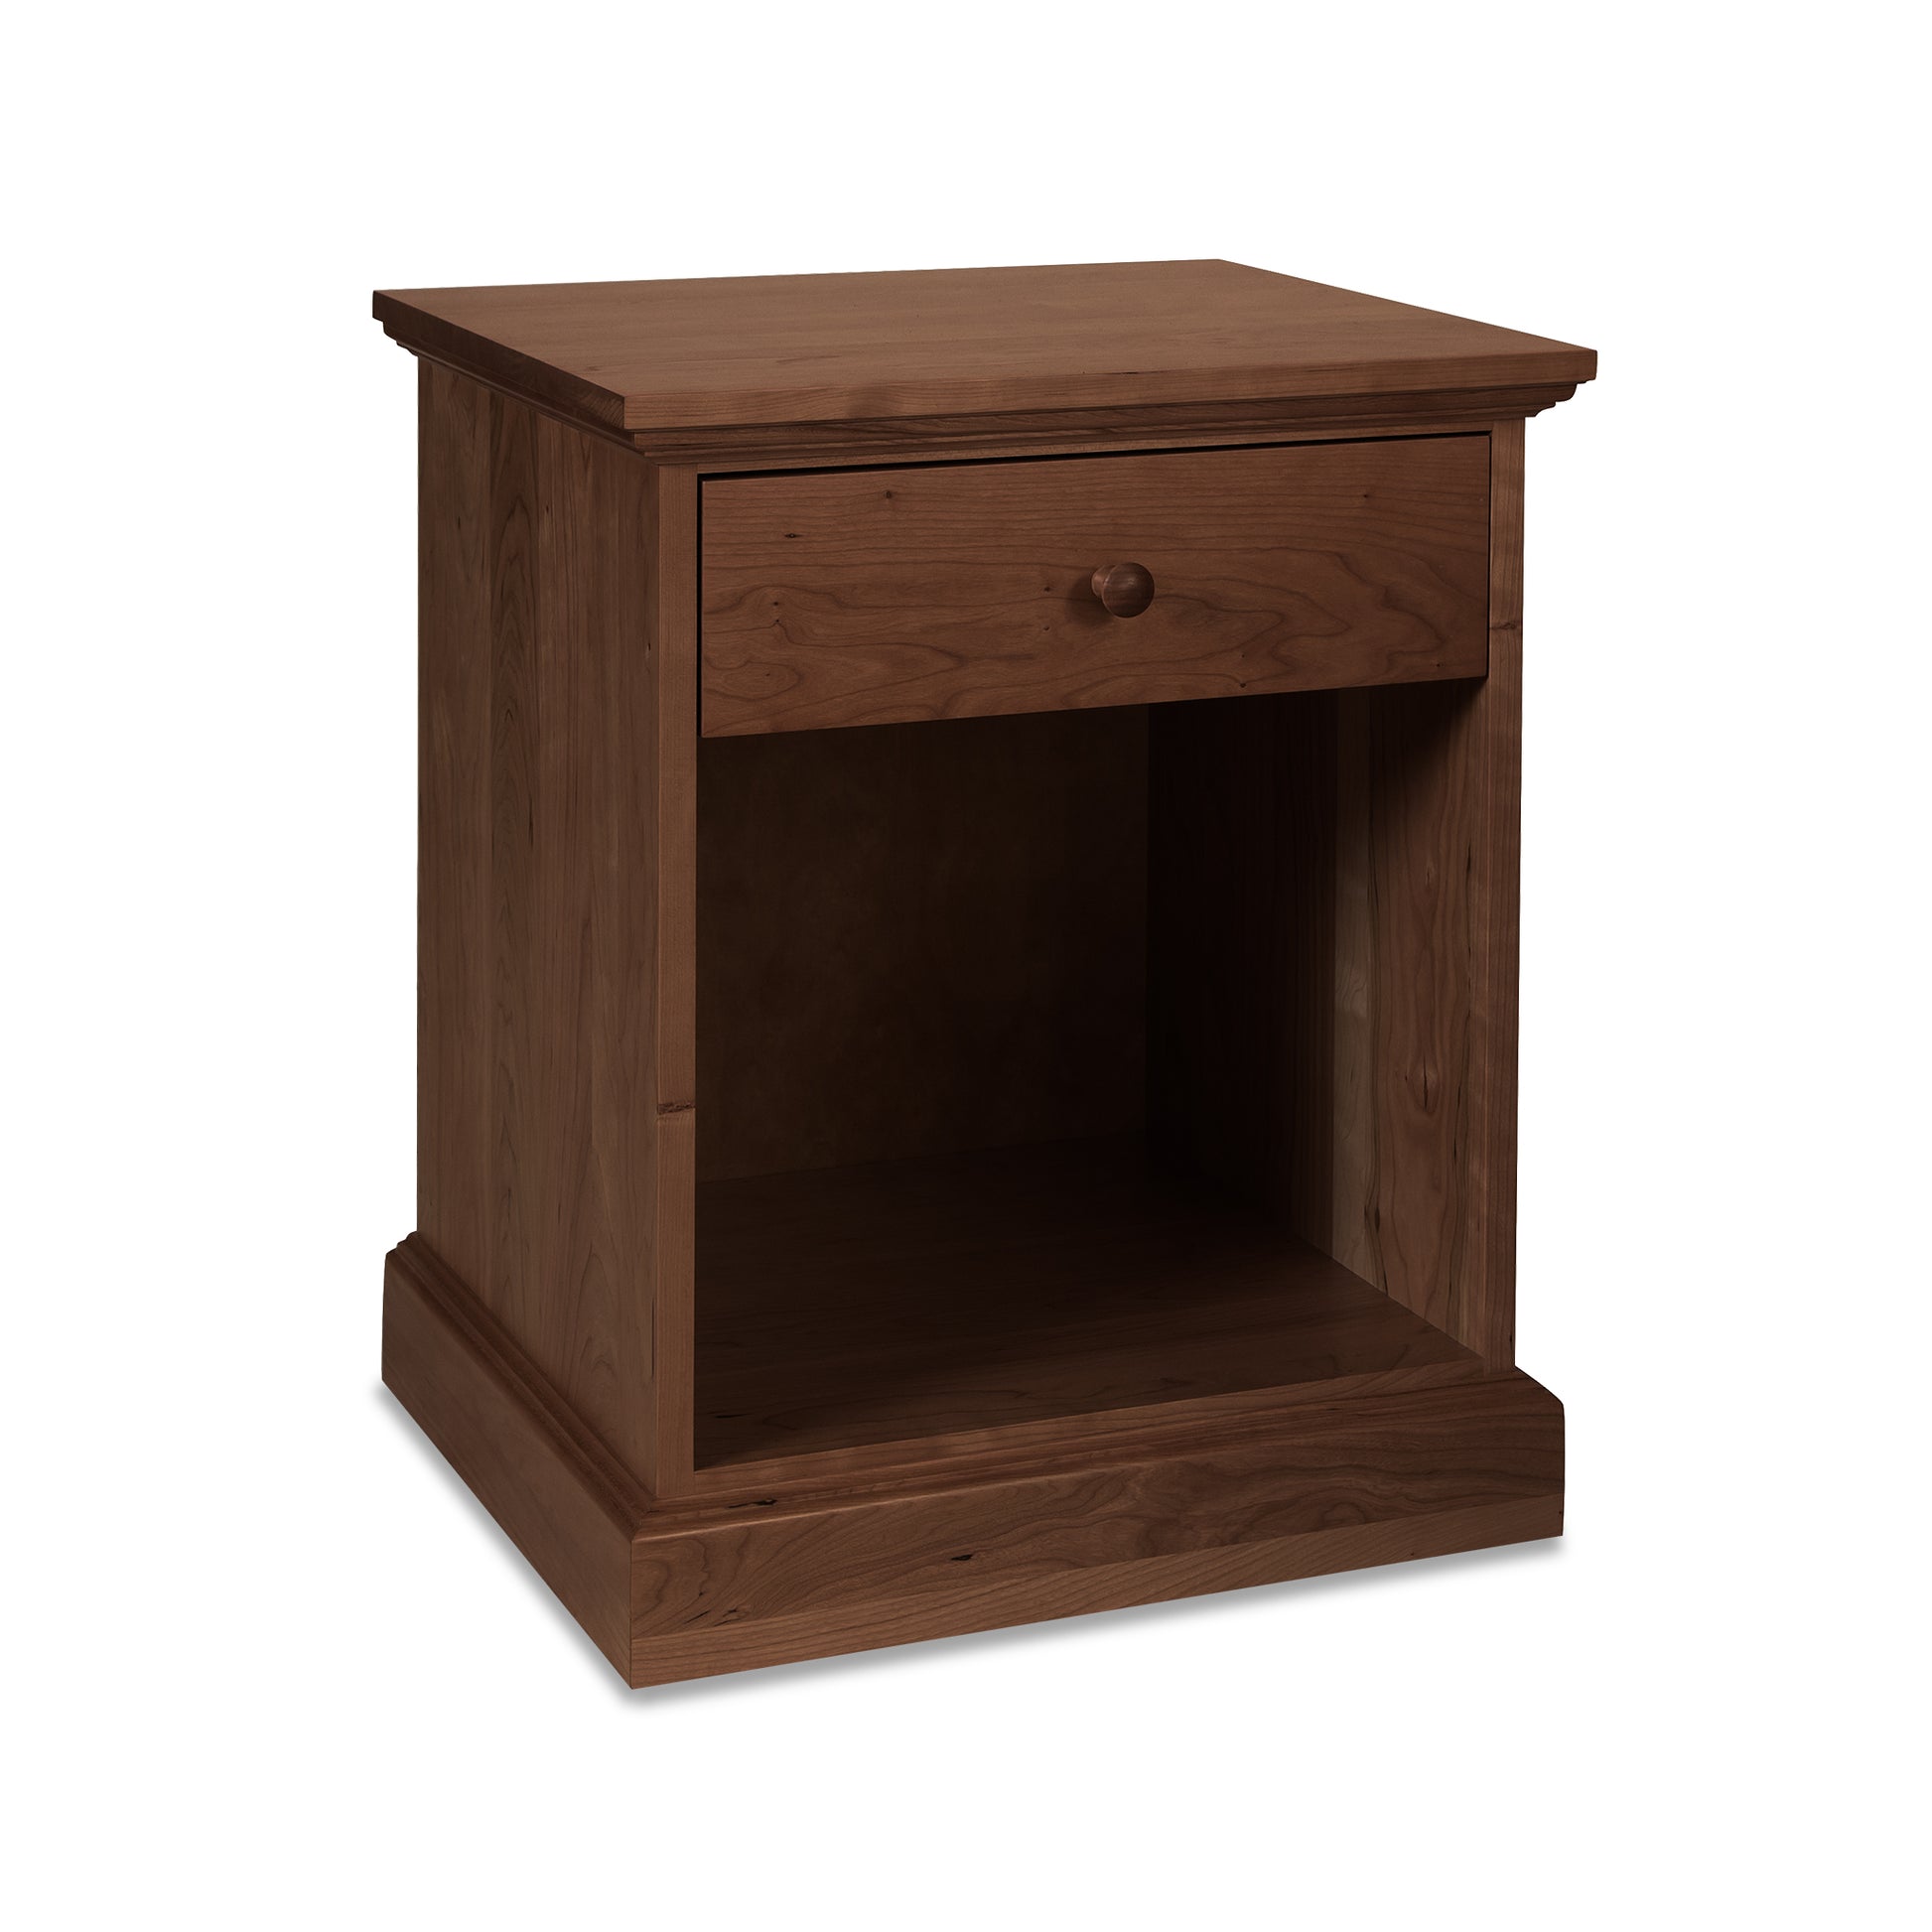 A luxury Lyndon Furniture New England Shaker 1-Drawer Enclosed Shelf Nightstand with a drawer on top.